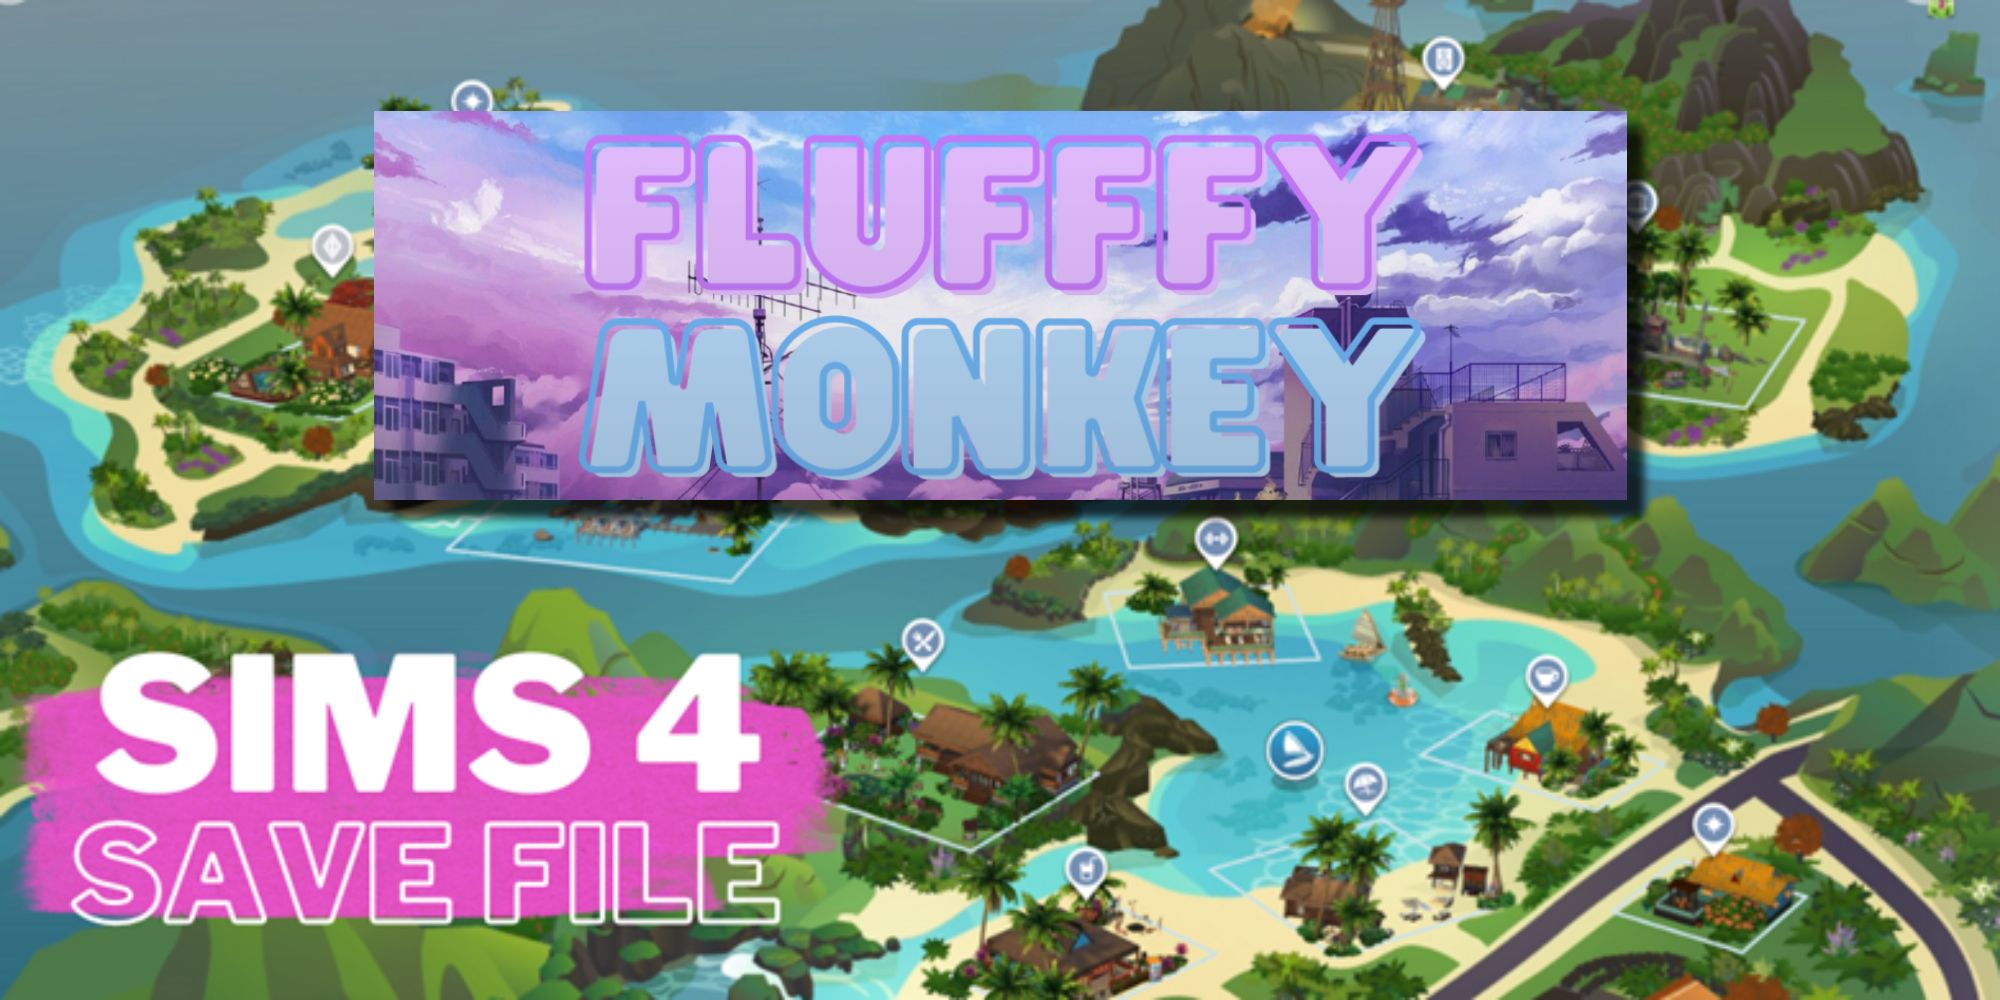 The Sims creator FlufffyMonkey has made a Save File for The Sims 4 to rebuild lots and households